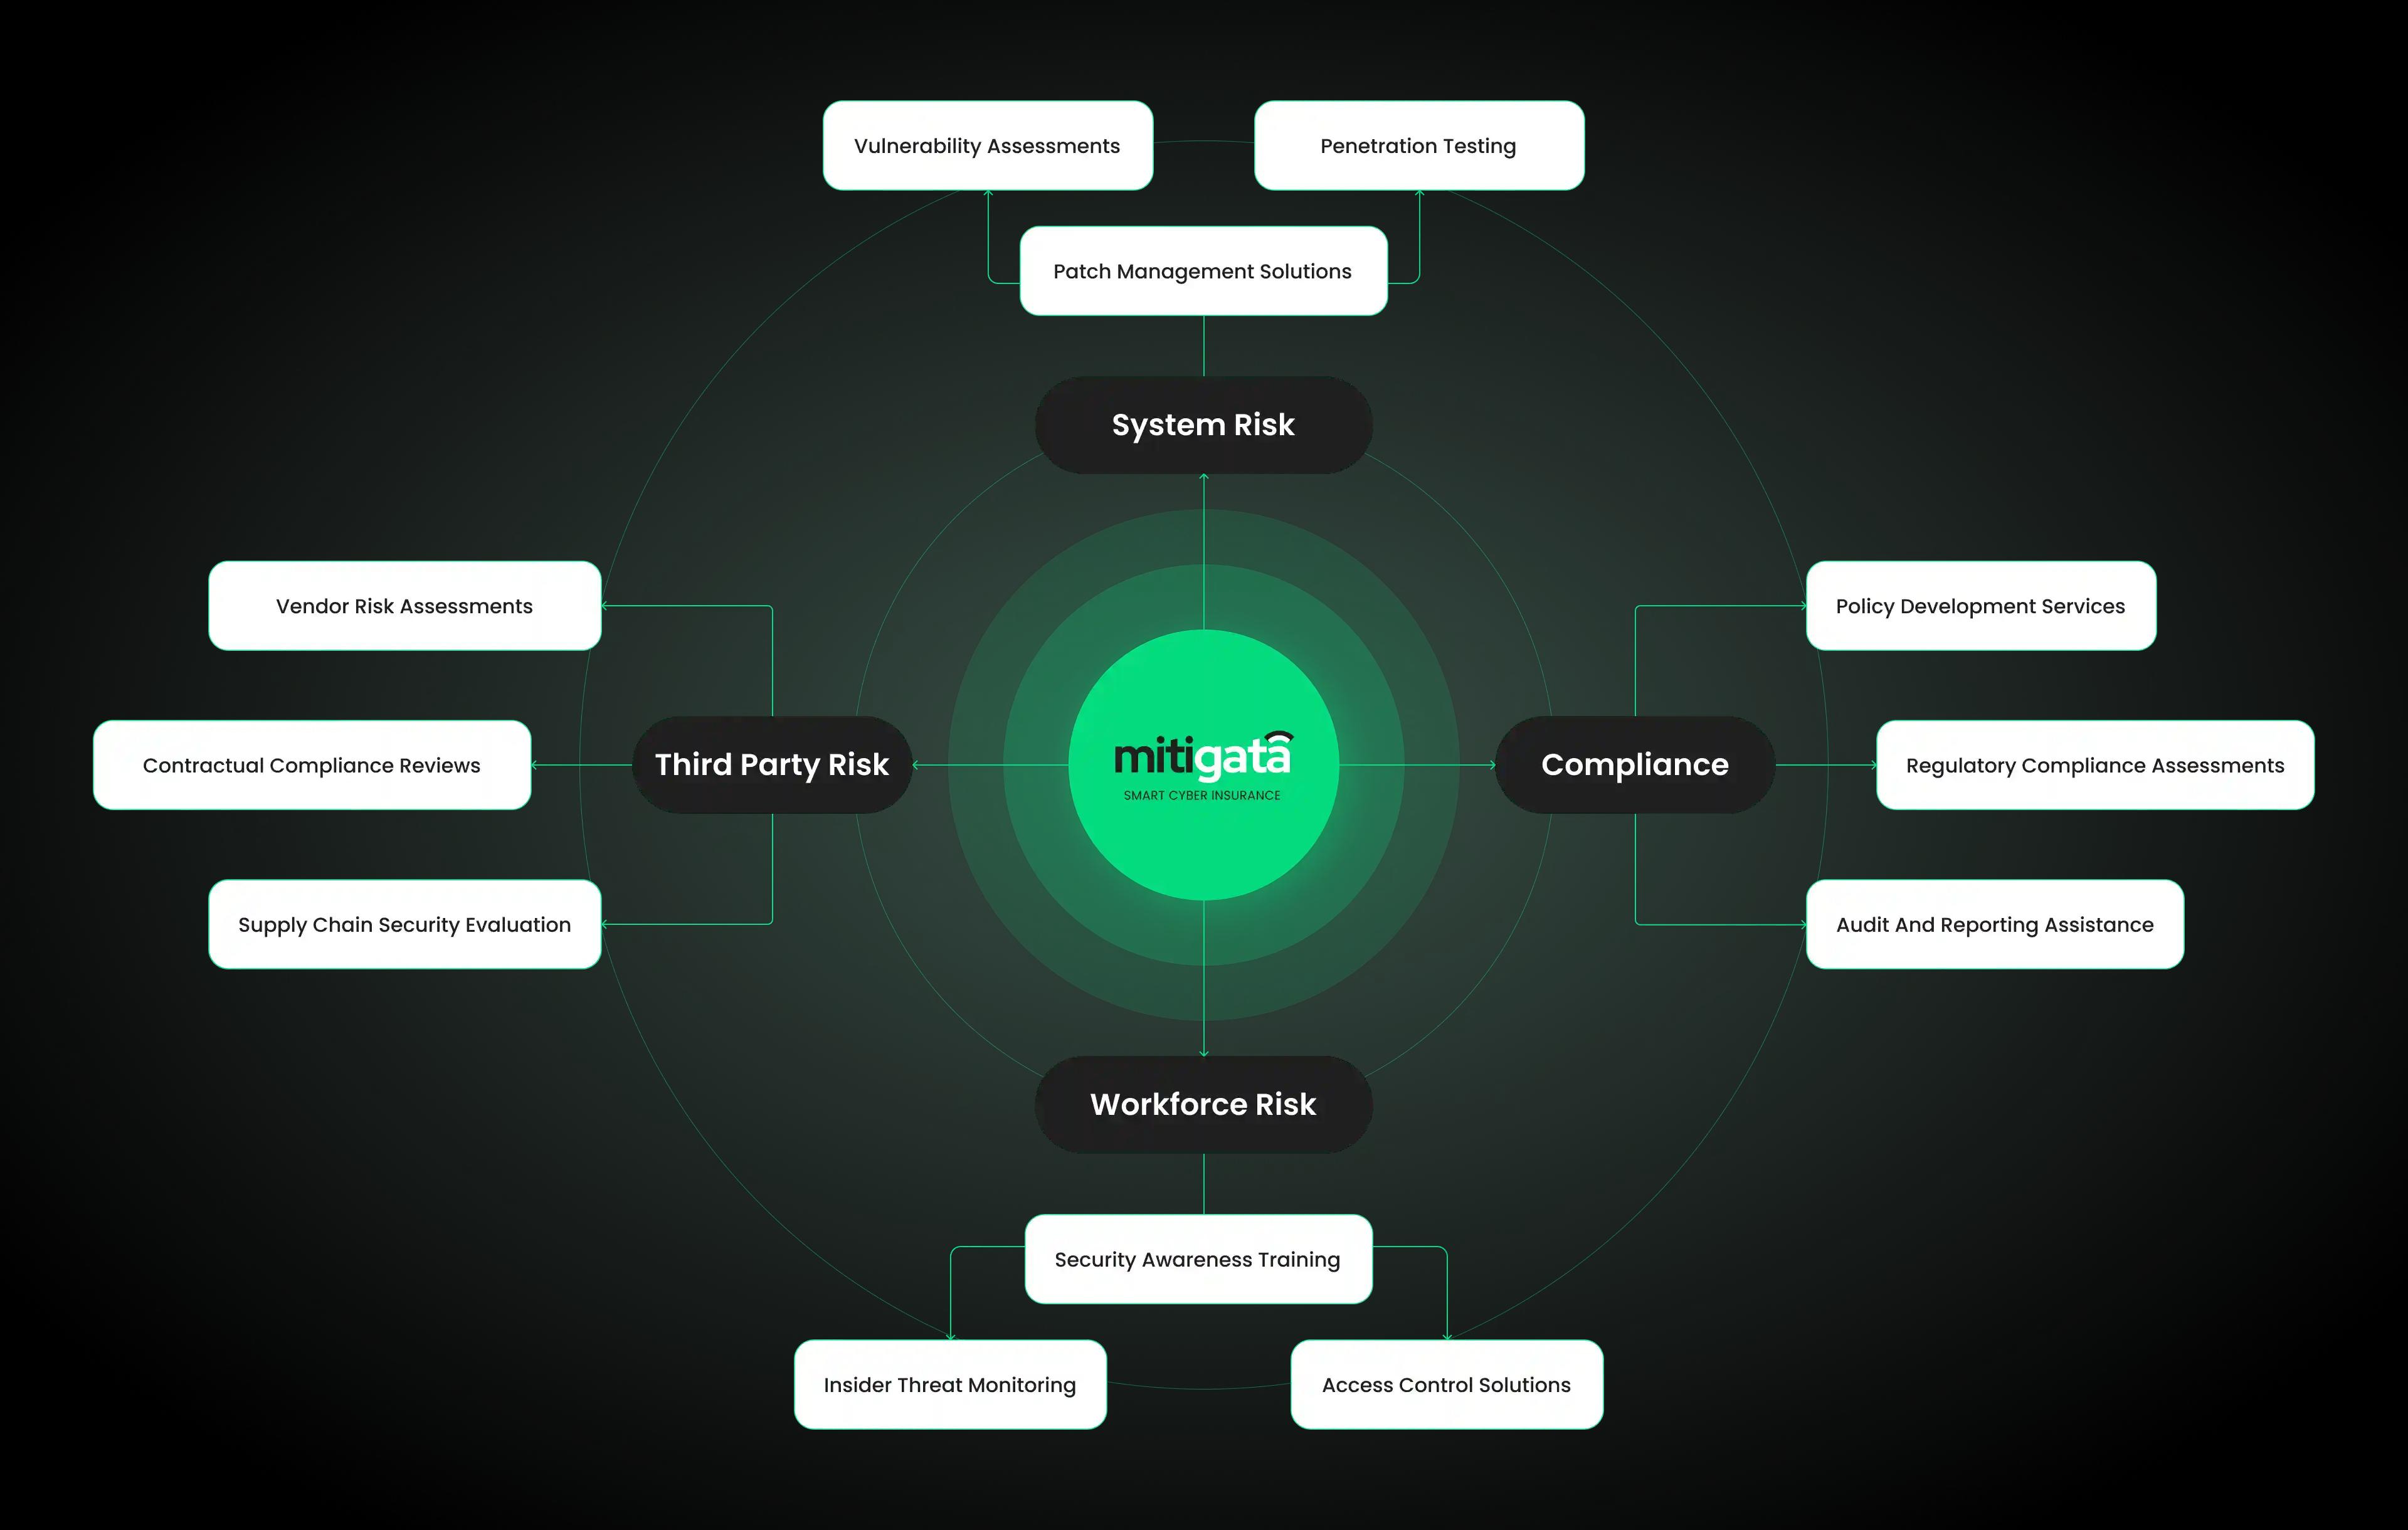 A conceptual flow chart from Mitigata showcasing various elements of cybersecurity risk, including System Risk, Third Party Risk, Workforce Risk, and Compliance, centred around the Mitigata logo.